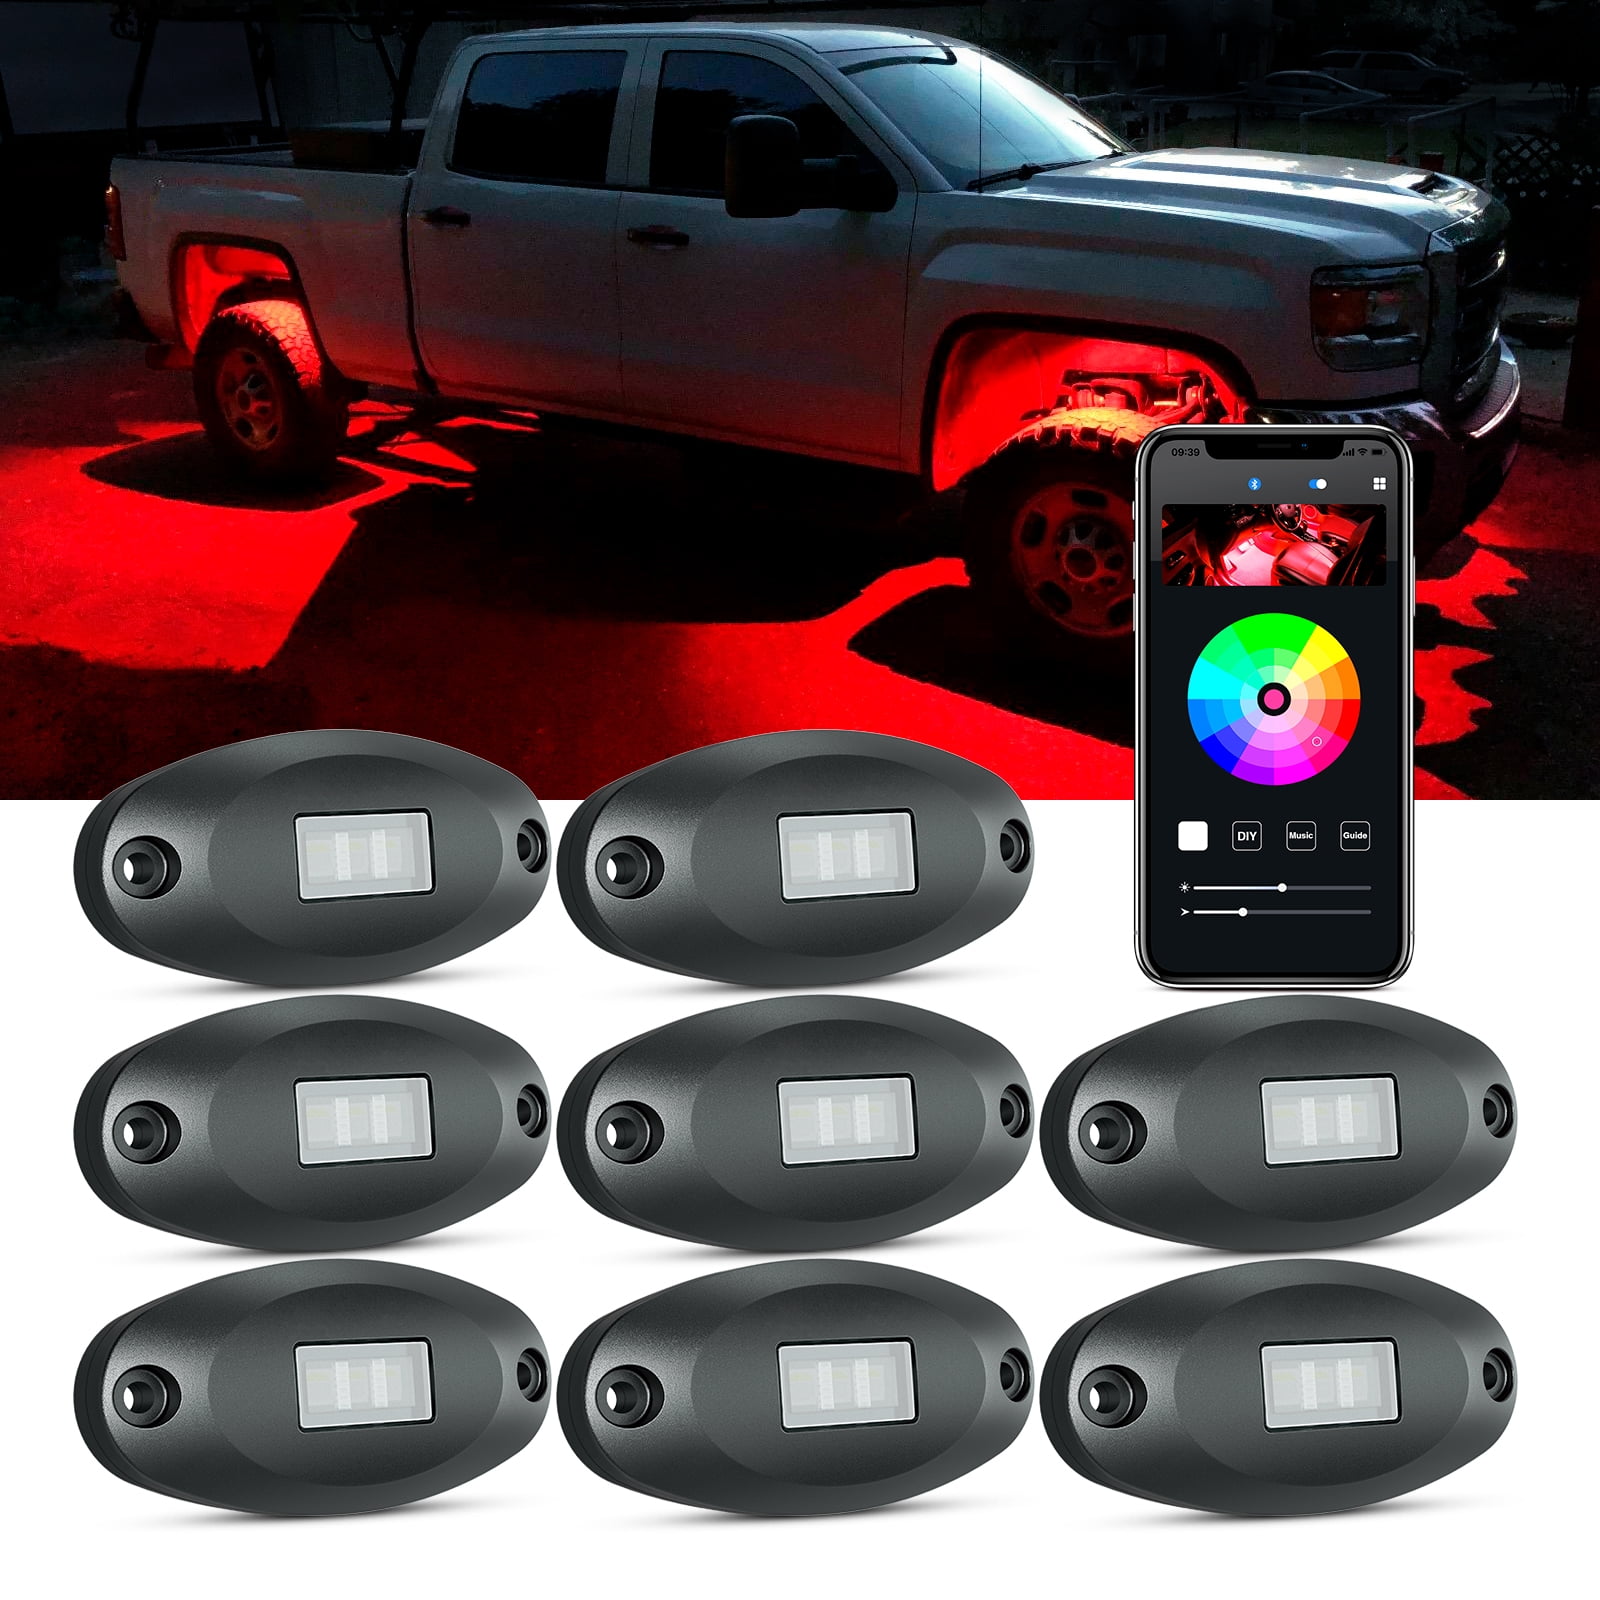 SS VISION Latest X1 RGB LED Rock Lights 4 Pods Bright Pure Color Underglow Multicolor Waterproof Neon Light with Bluetooth Controller,Music Mode,Timing,Strobe for Cars Off Road SUV UTV ATV Vehicles 